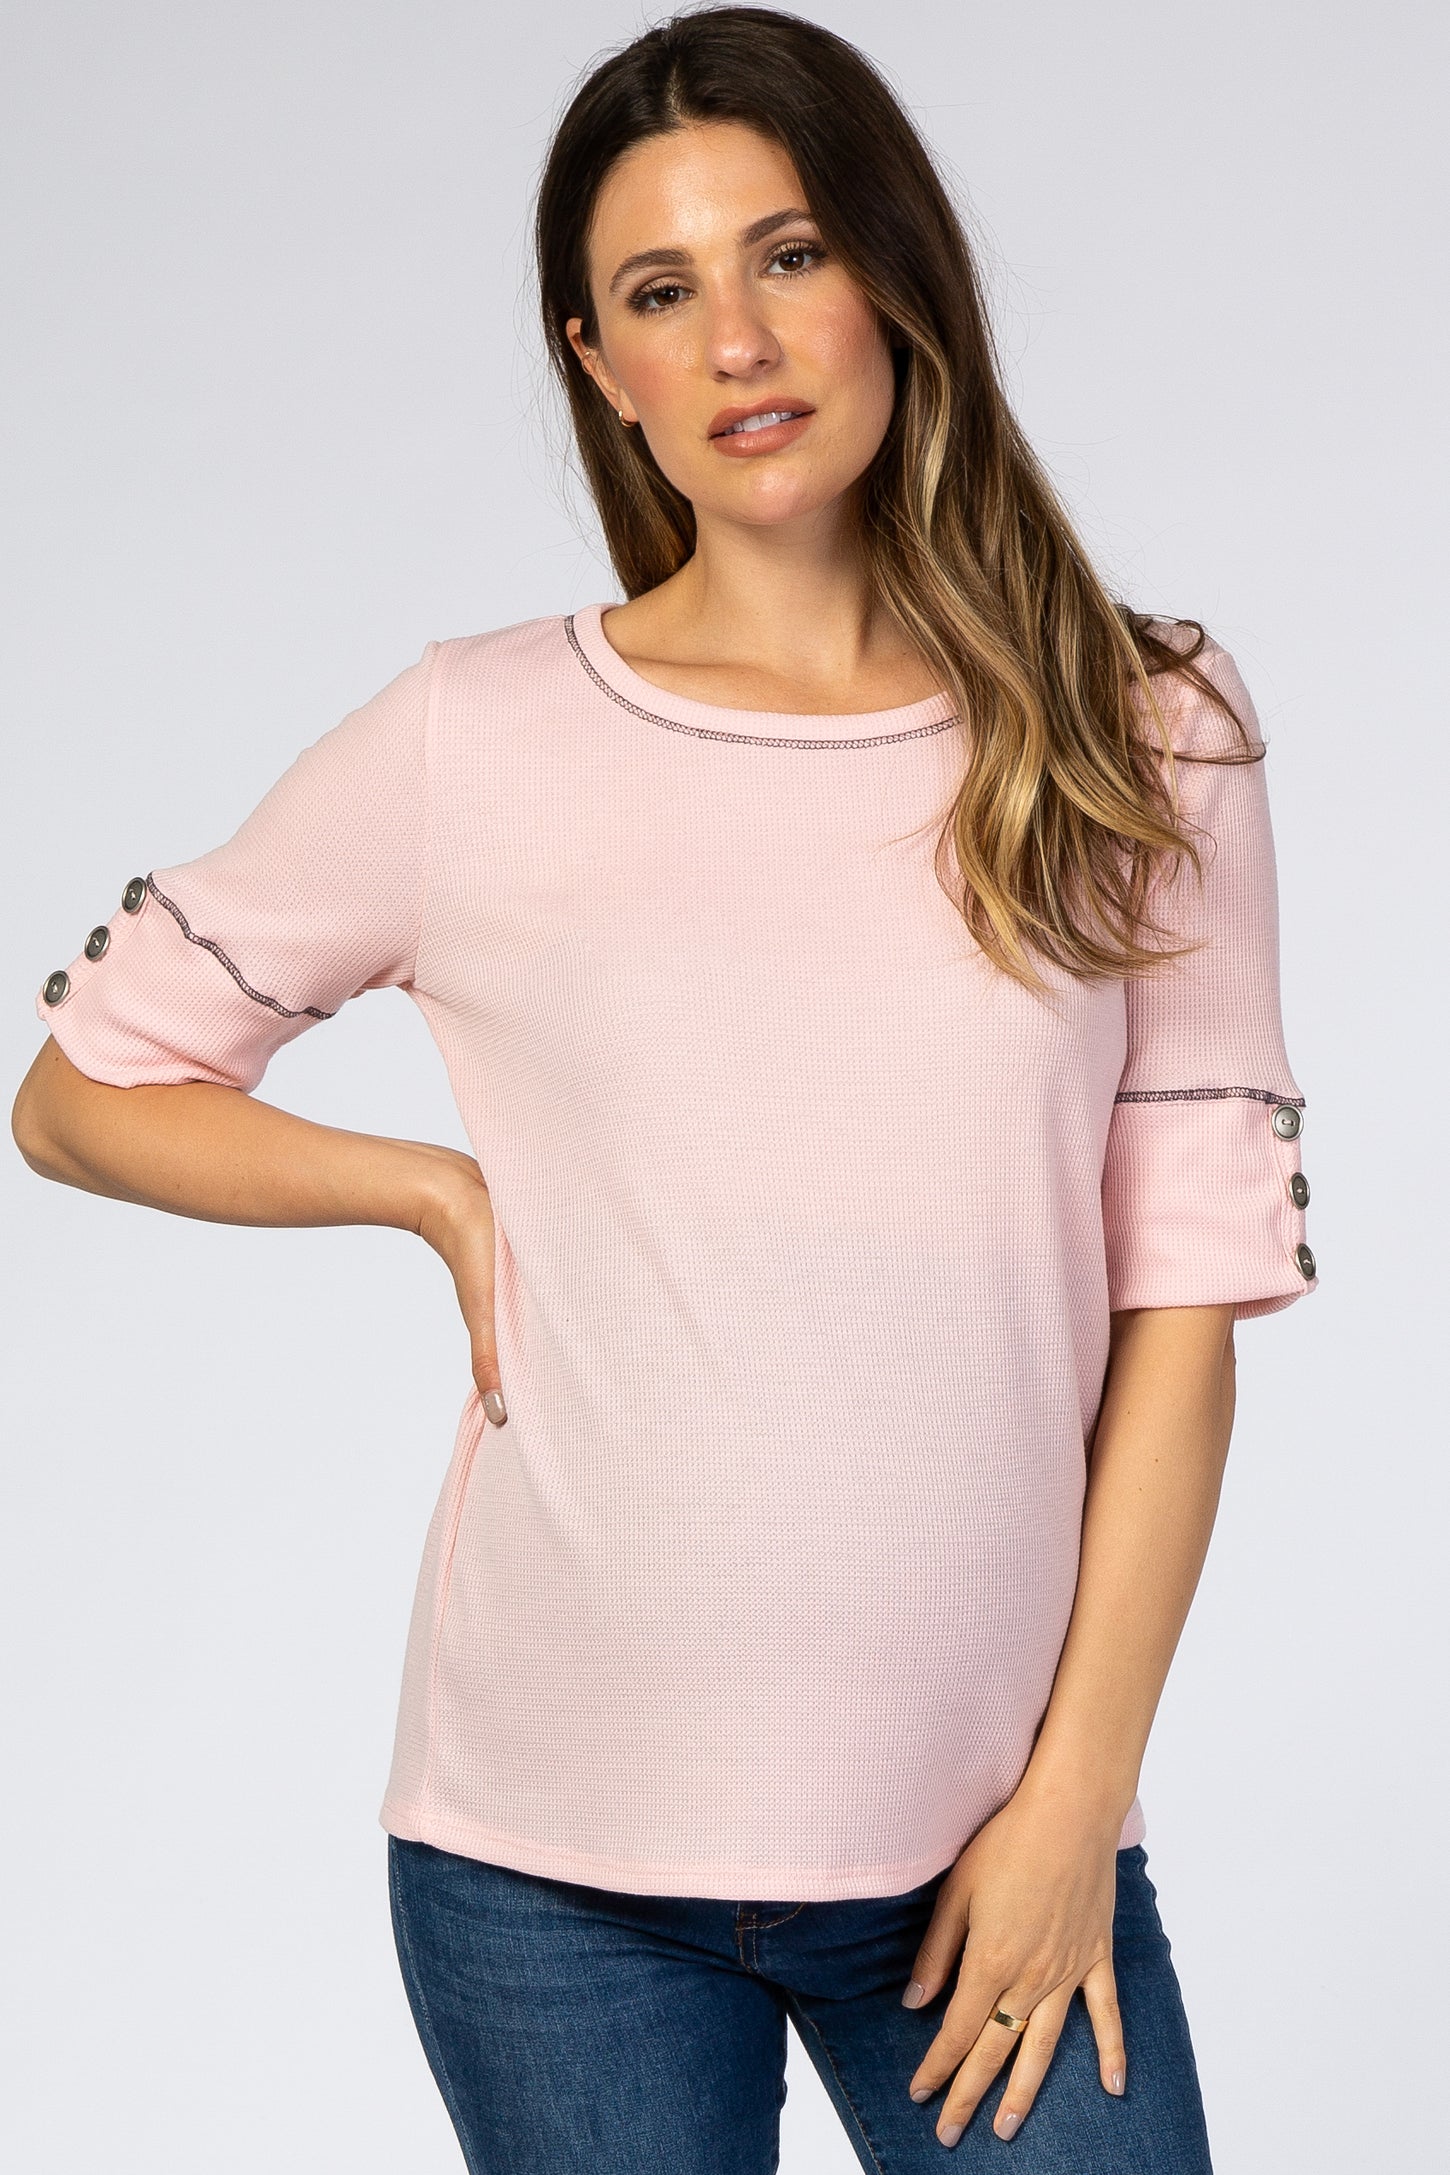 Light Pink Waffle Knit Button Sleeve Maternity Top